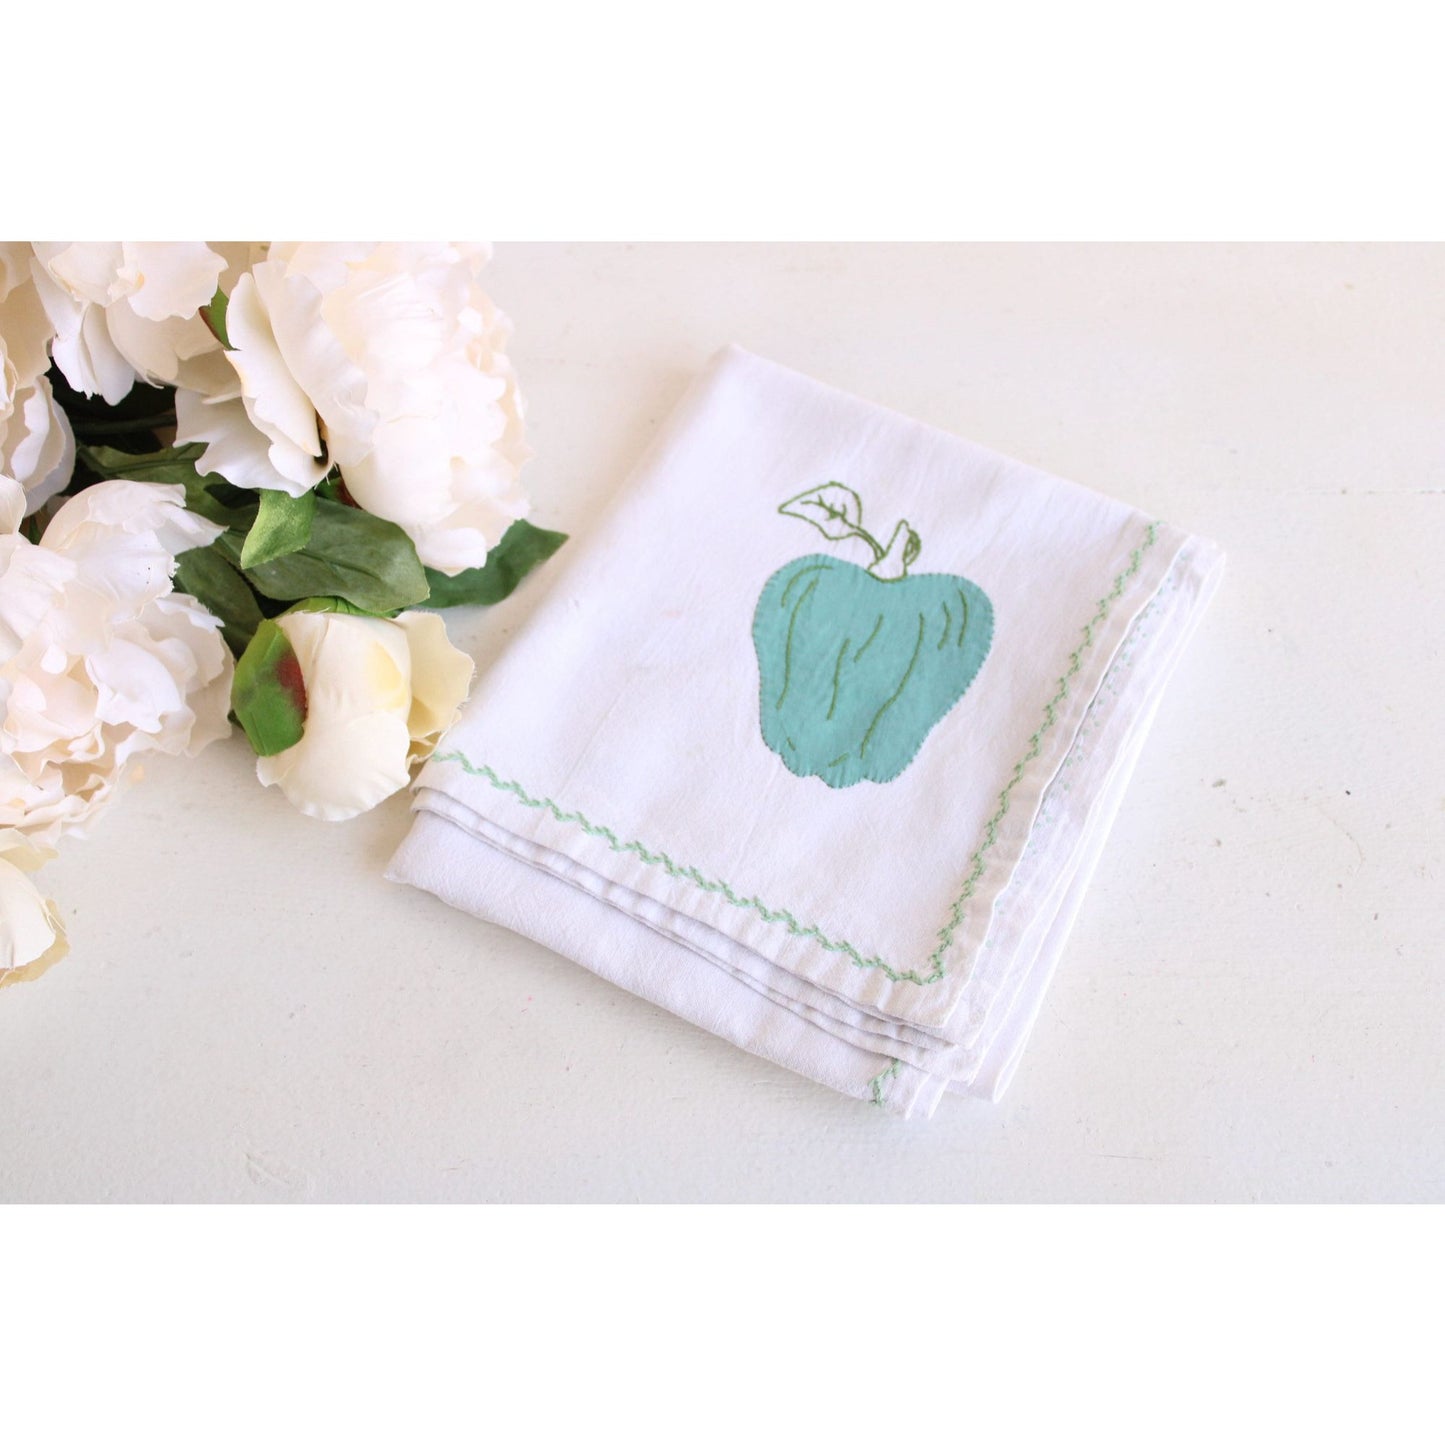 Vintage 1950s Tablecloth or Towel with Apple Applique